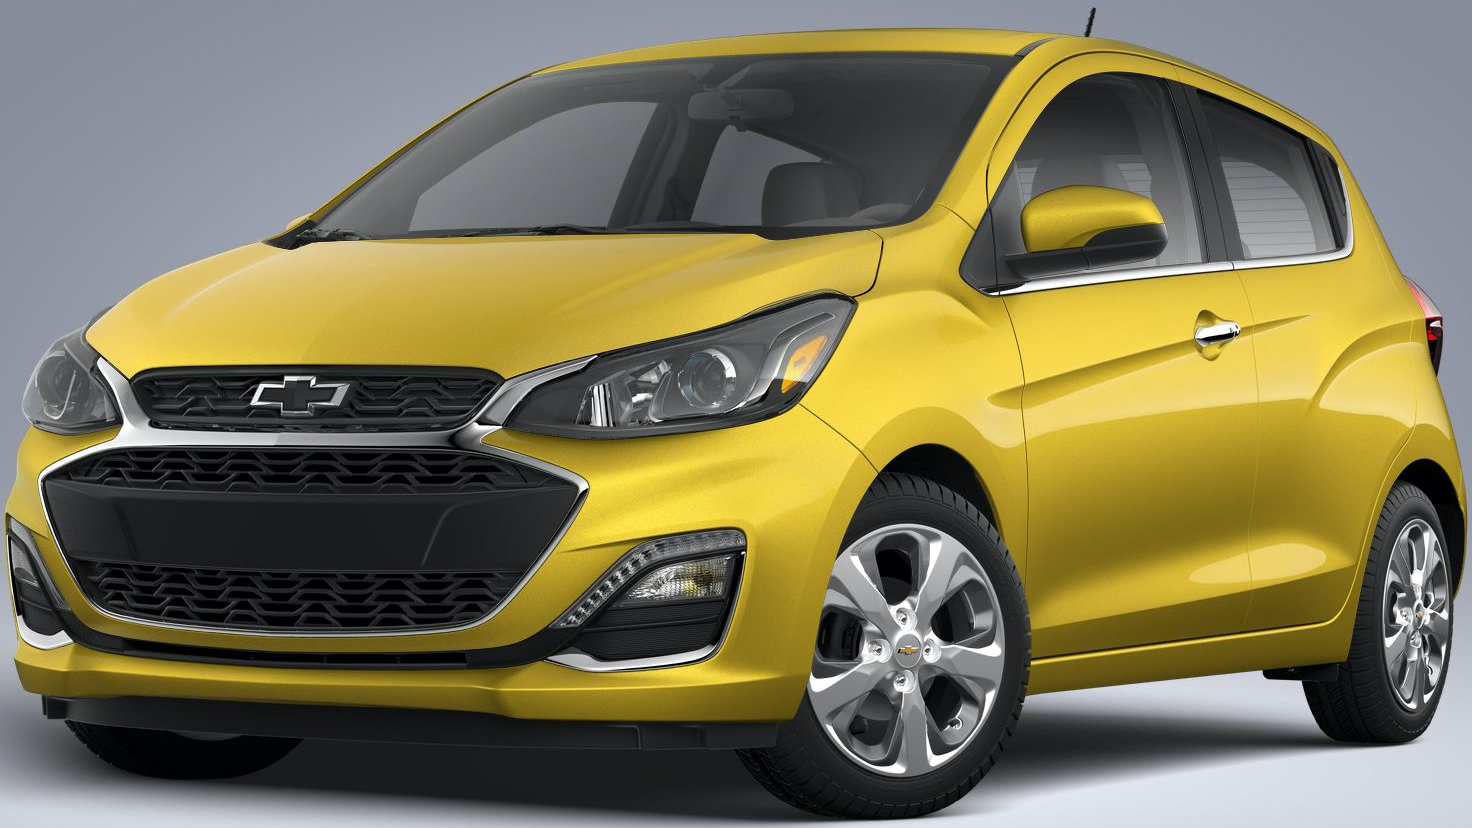 2022 Chevy Spark Gets New Nitro Yellow Color: First Look